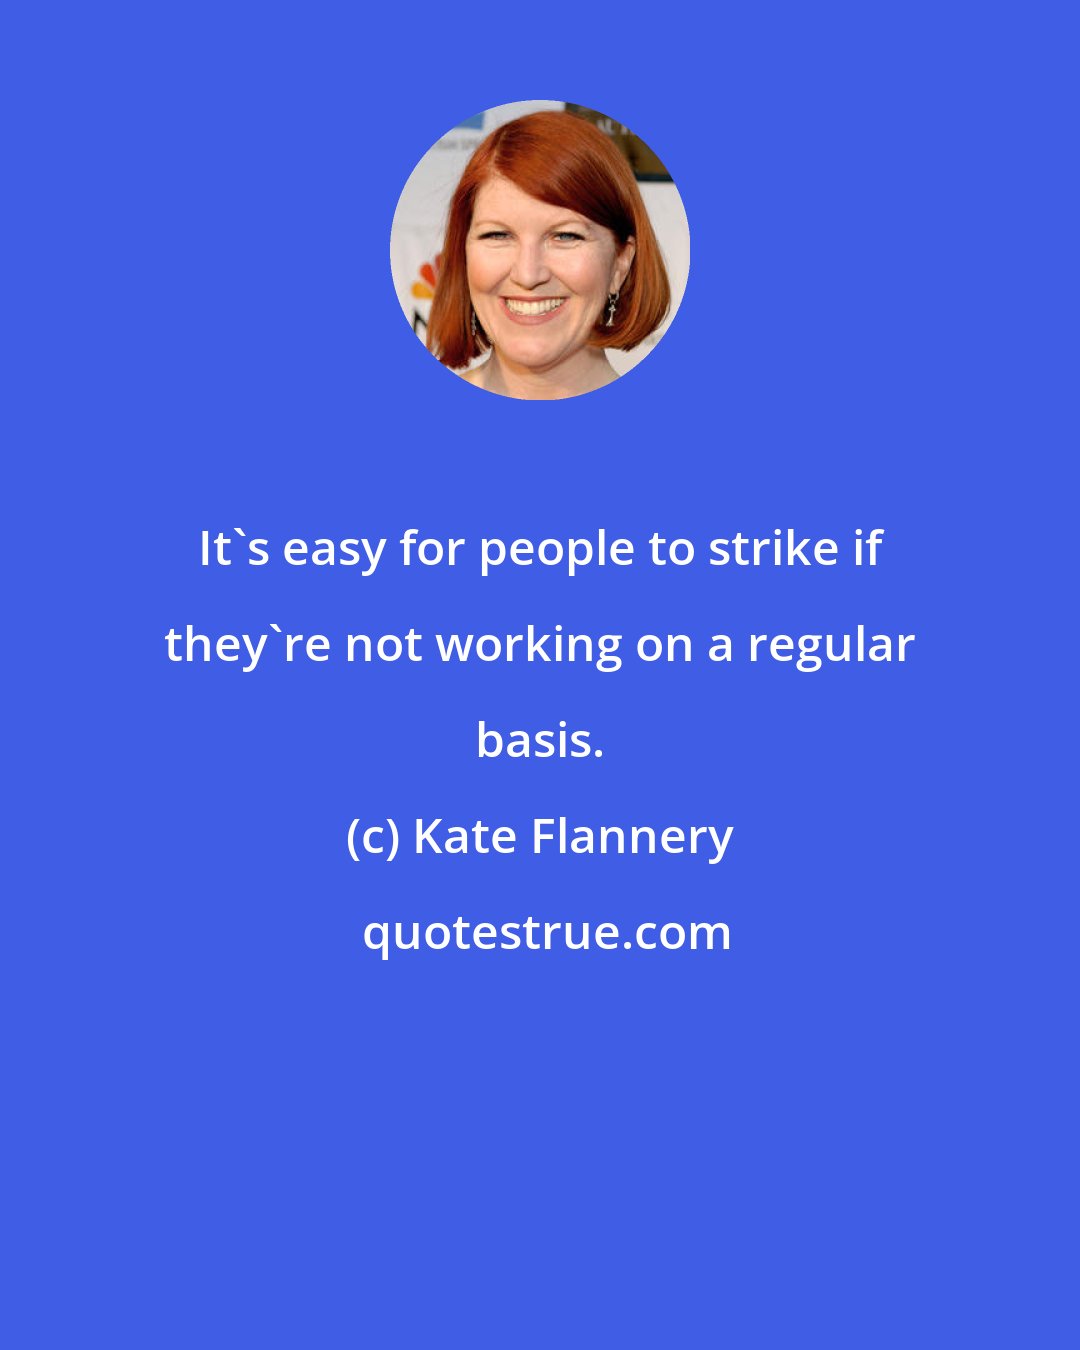 Kate Flannery: It's easy for people to strike if they're not working on a regular basis.